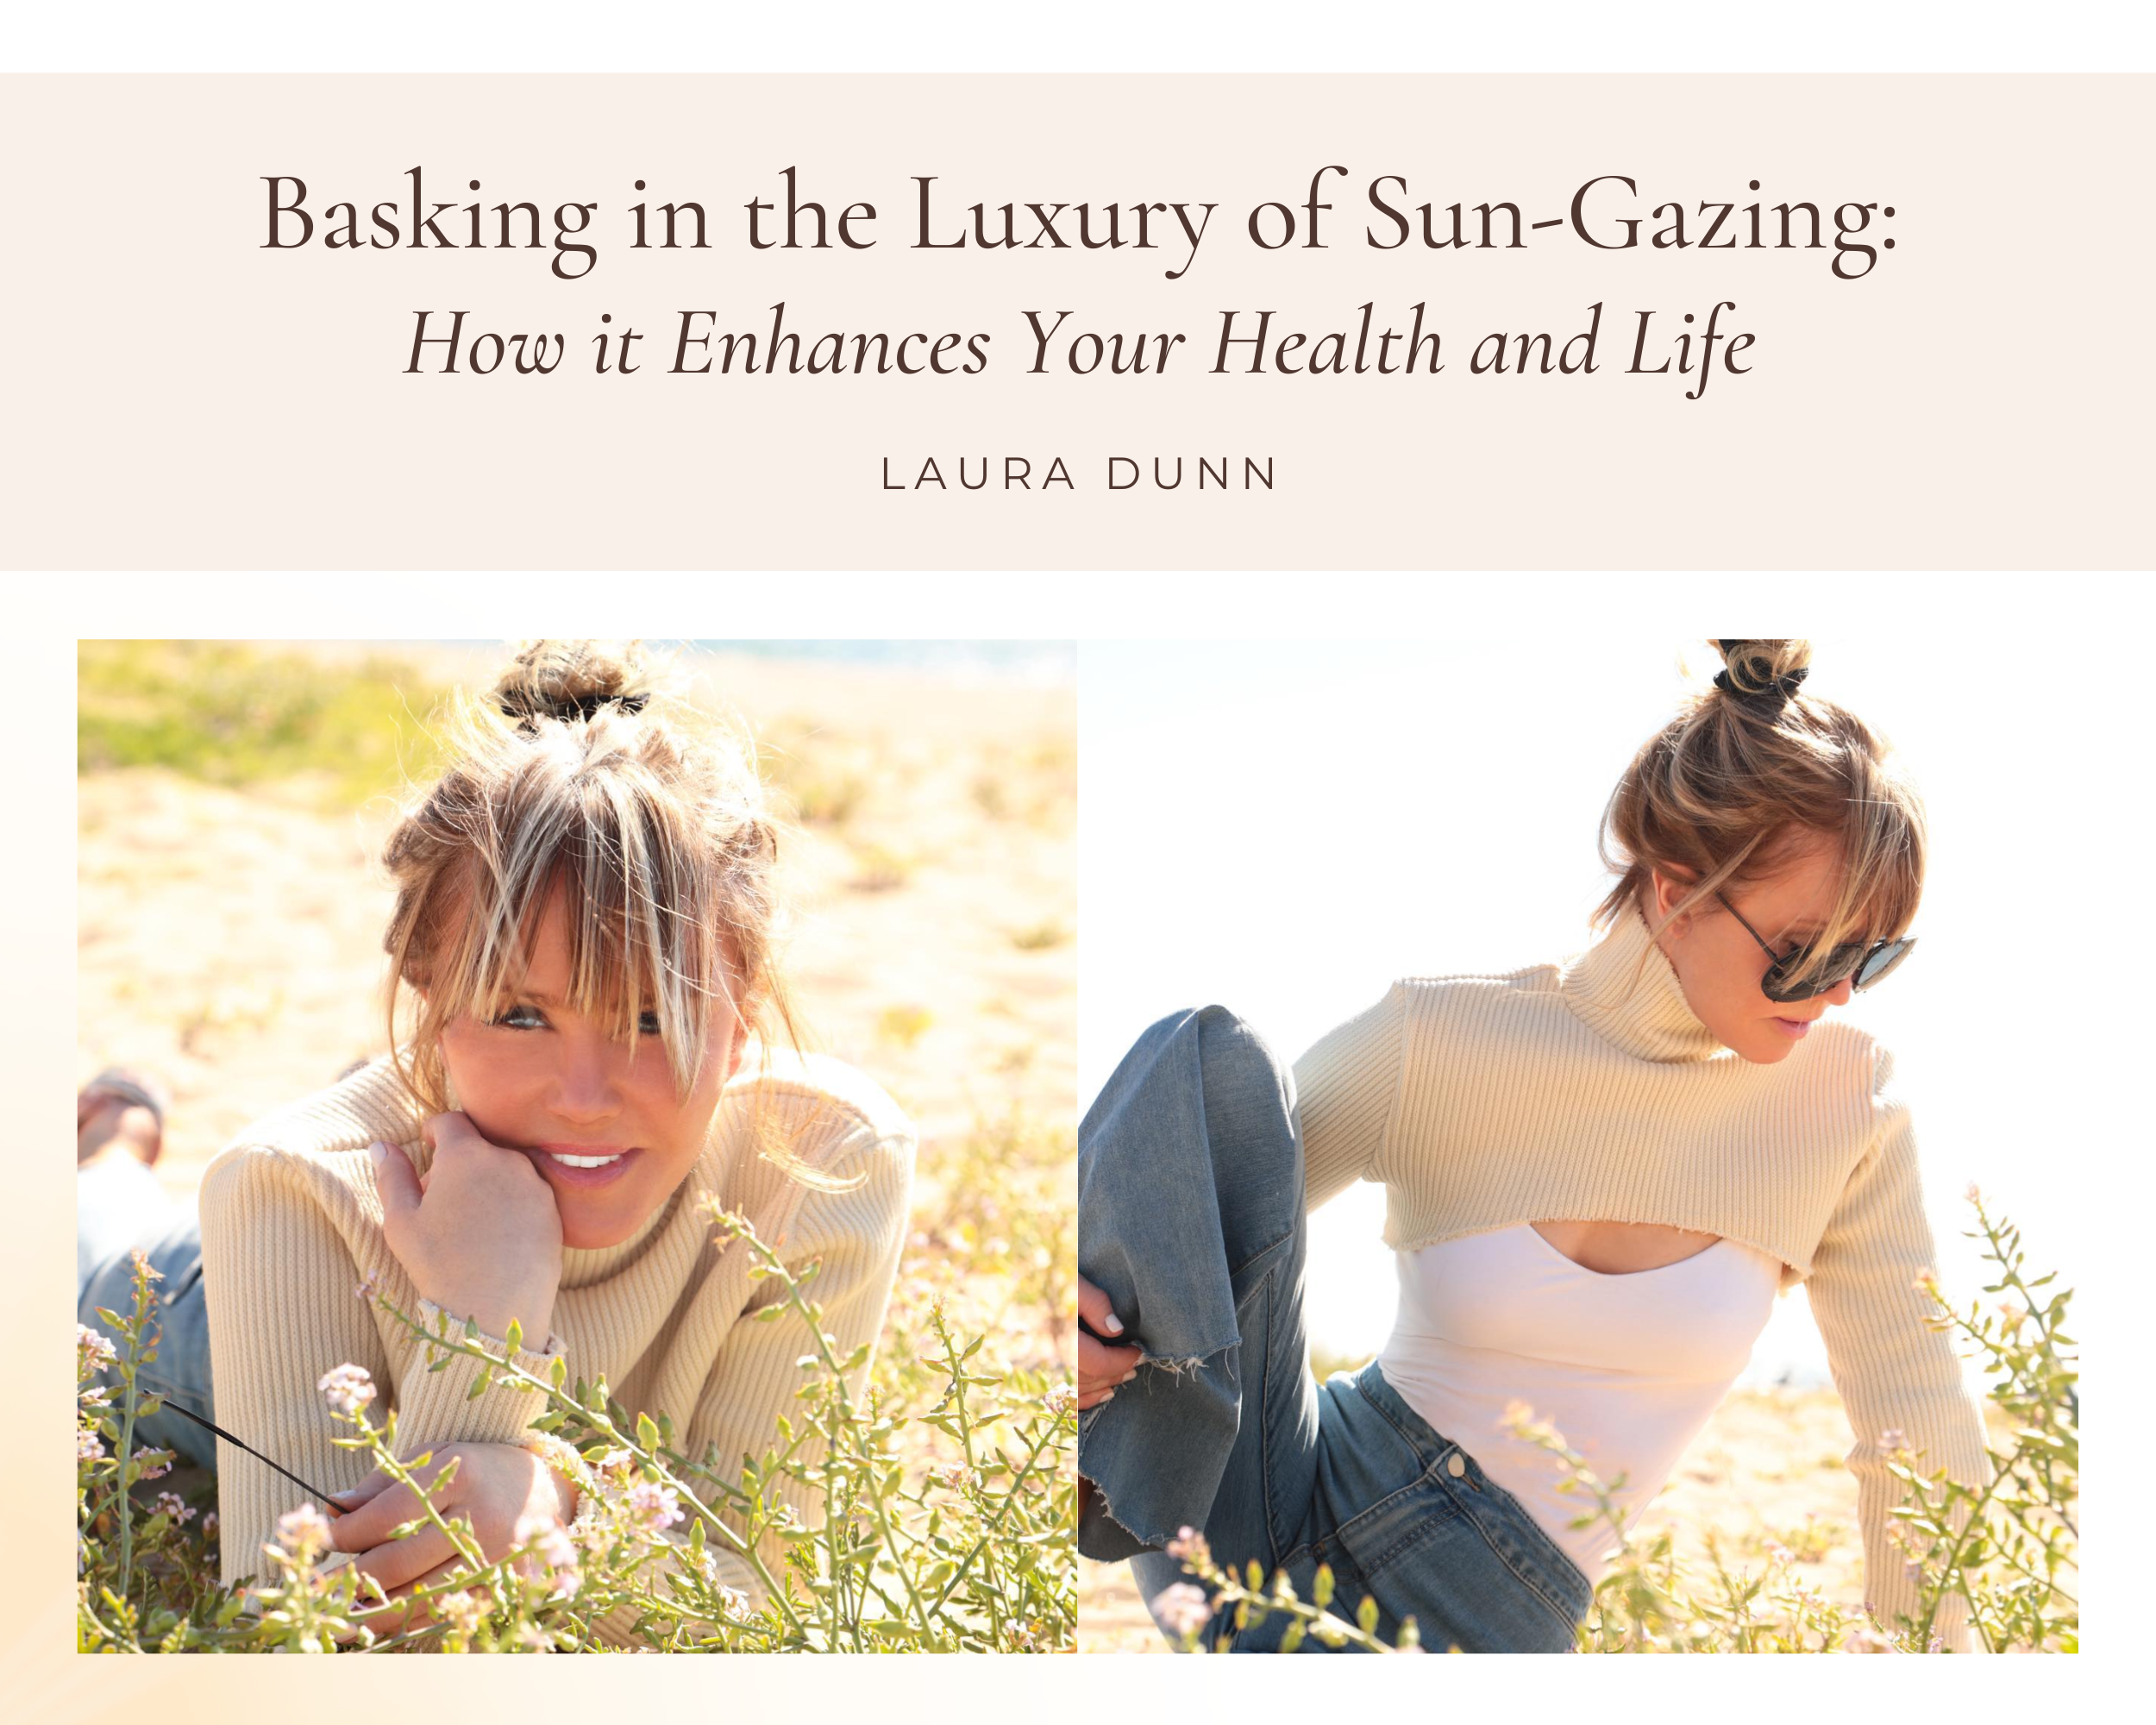 The health benefits of sun-gazing - how sun-gazing can enhance your health and life